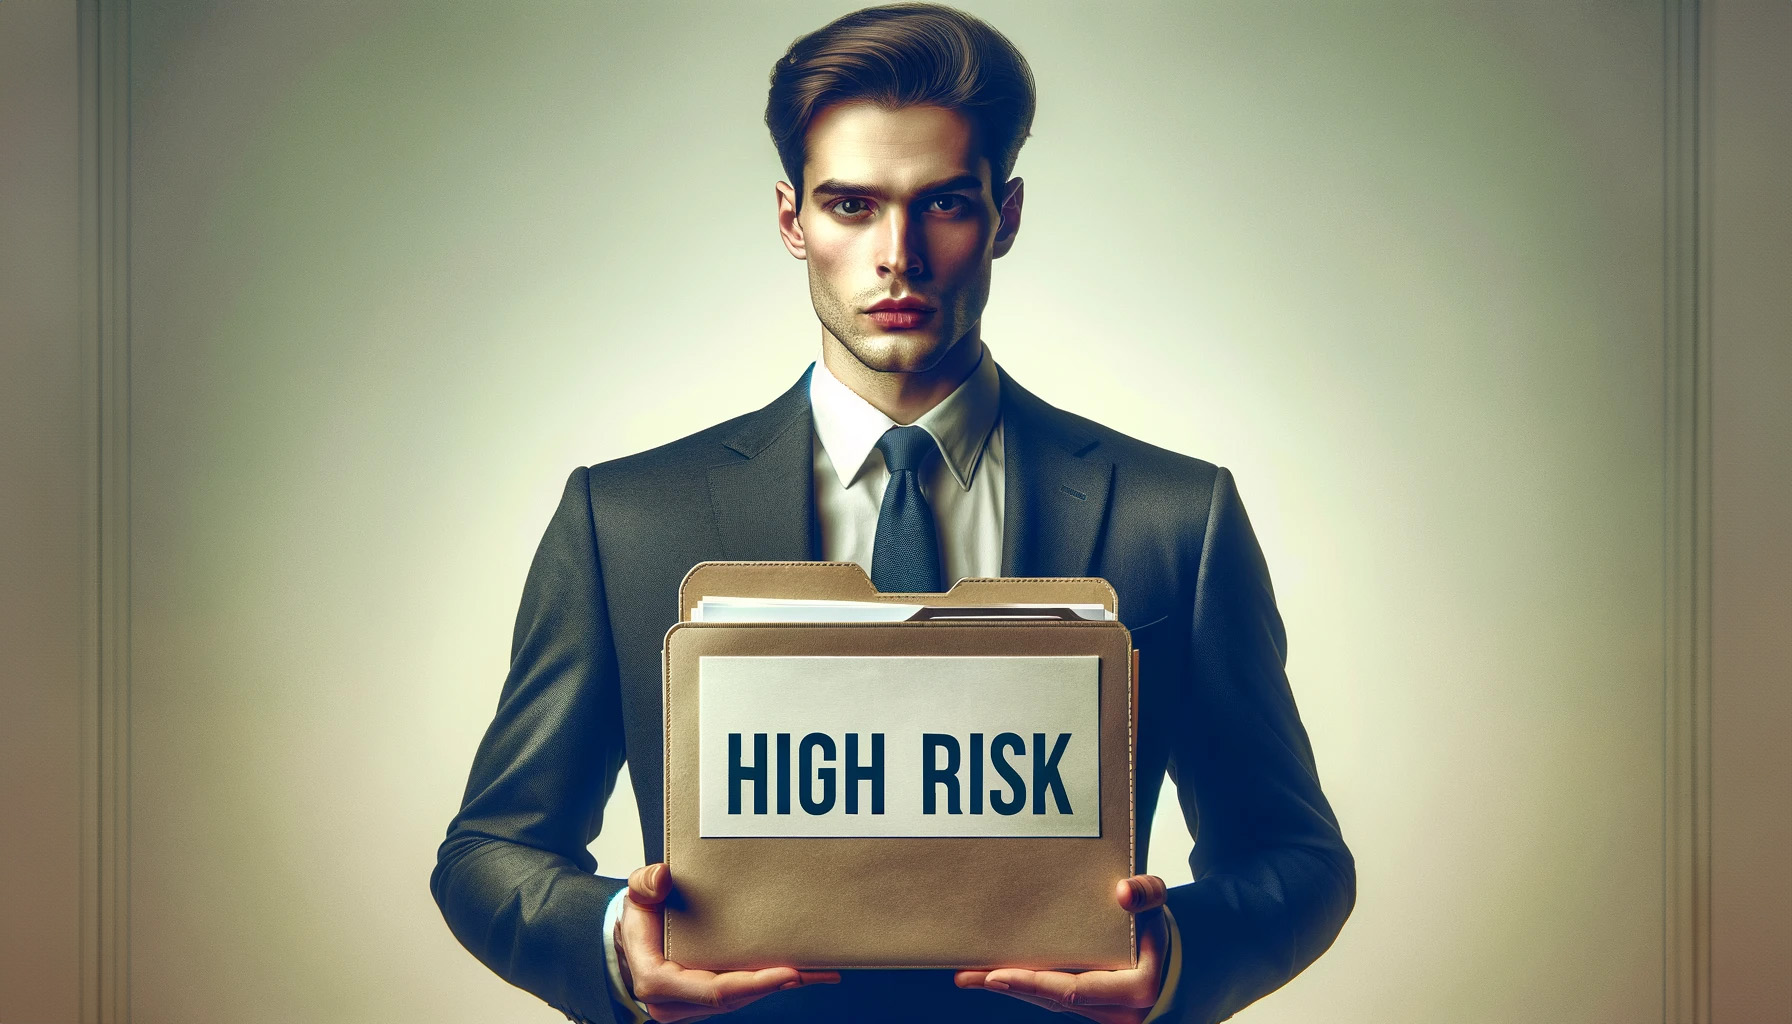 businessman holding a file labeled "high risk"